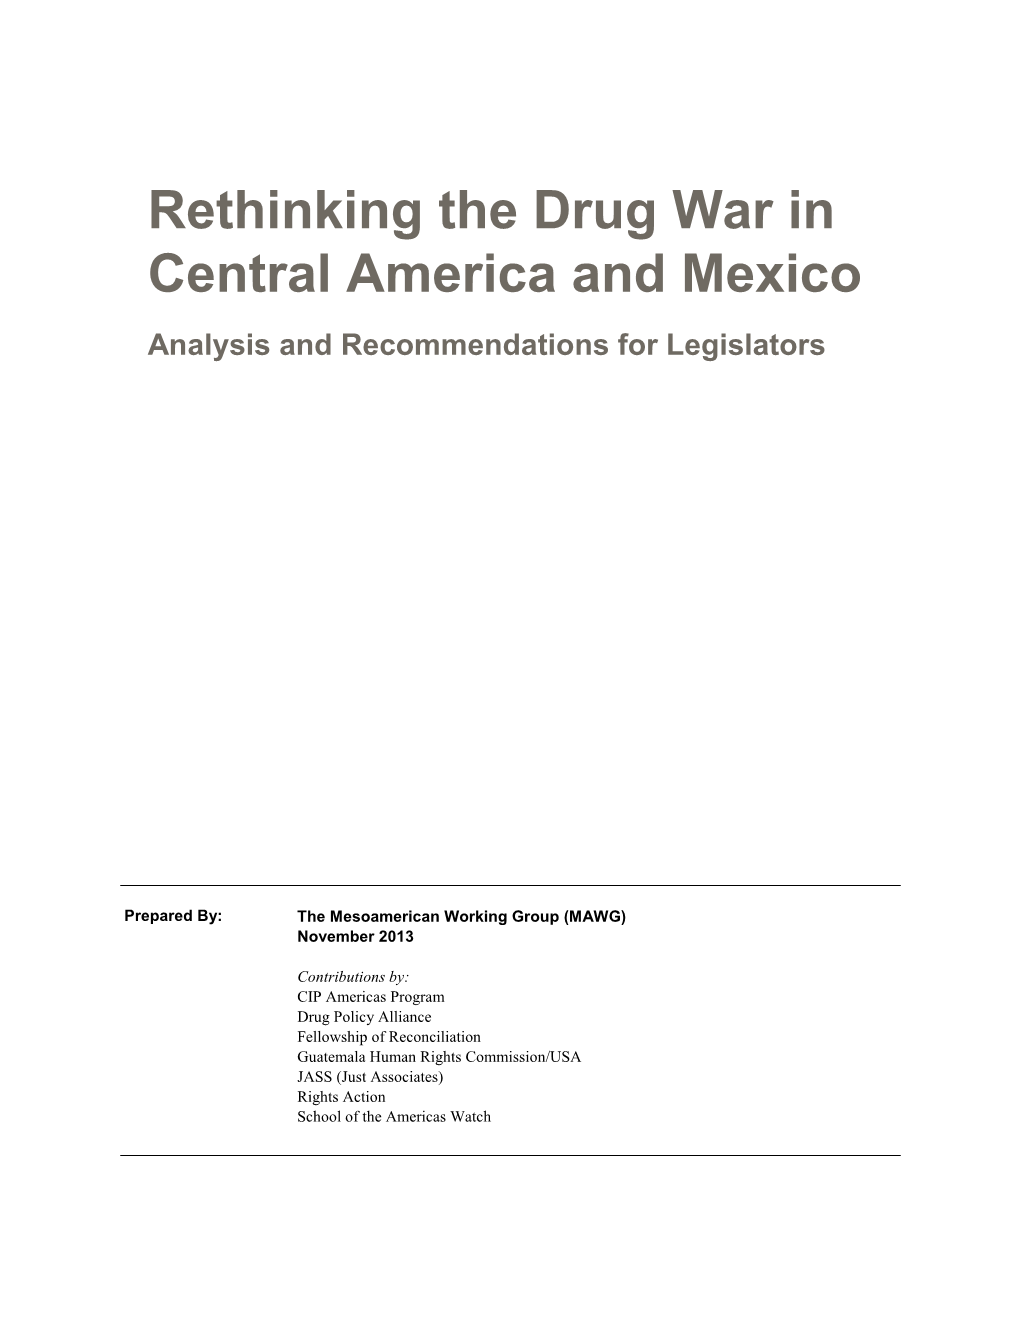 Rethinking the Drug War in Central America and Mexico Analysis and Recommendations for Legislators